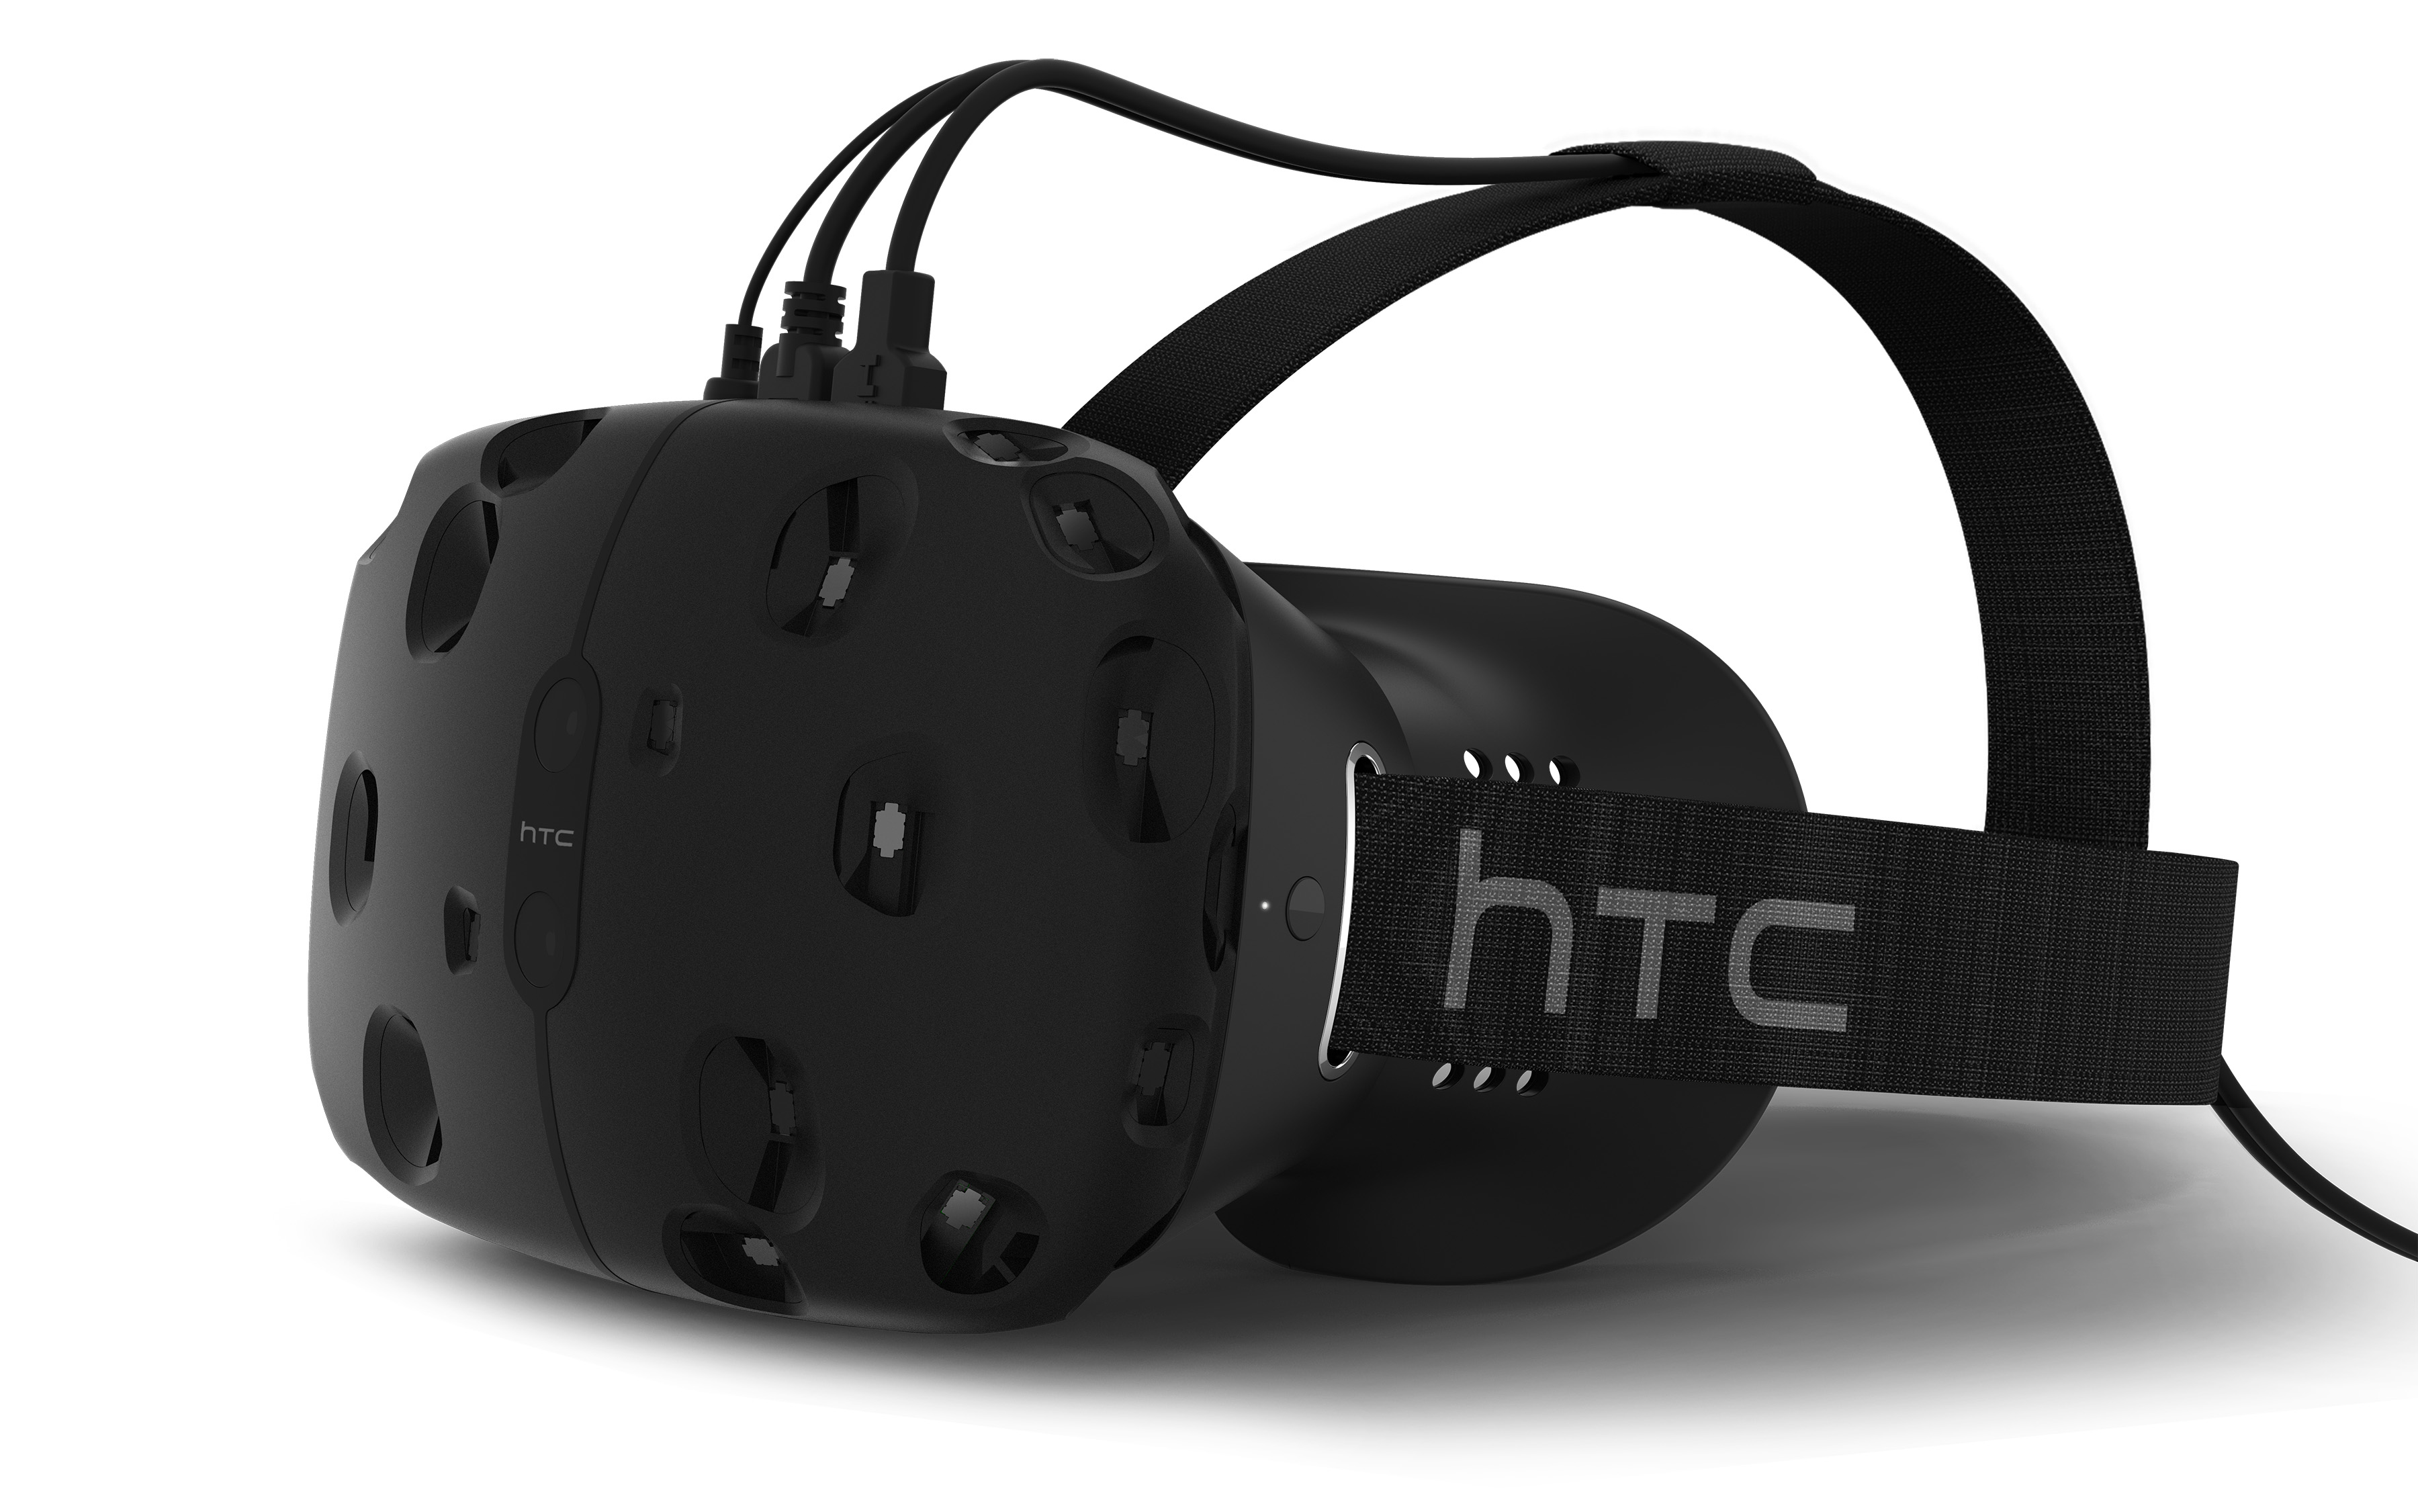 HTC Announces New VR Headset: the Vive | Player Theory